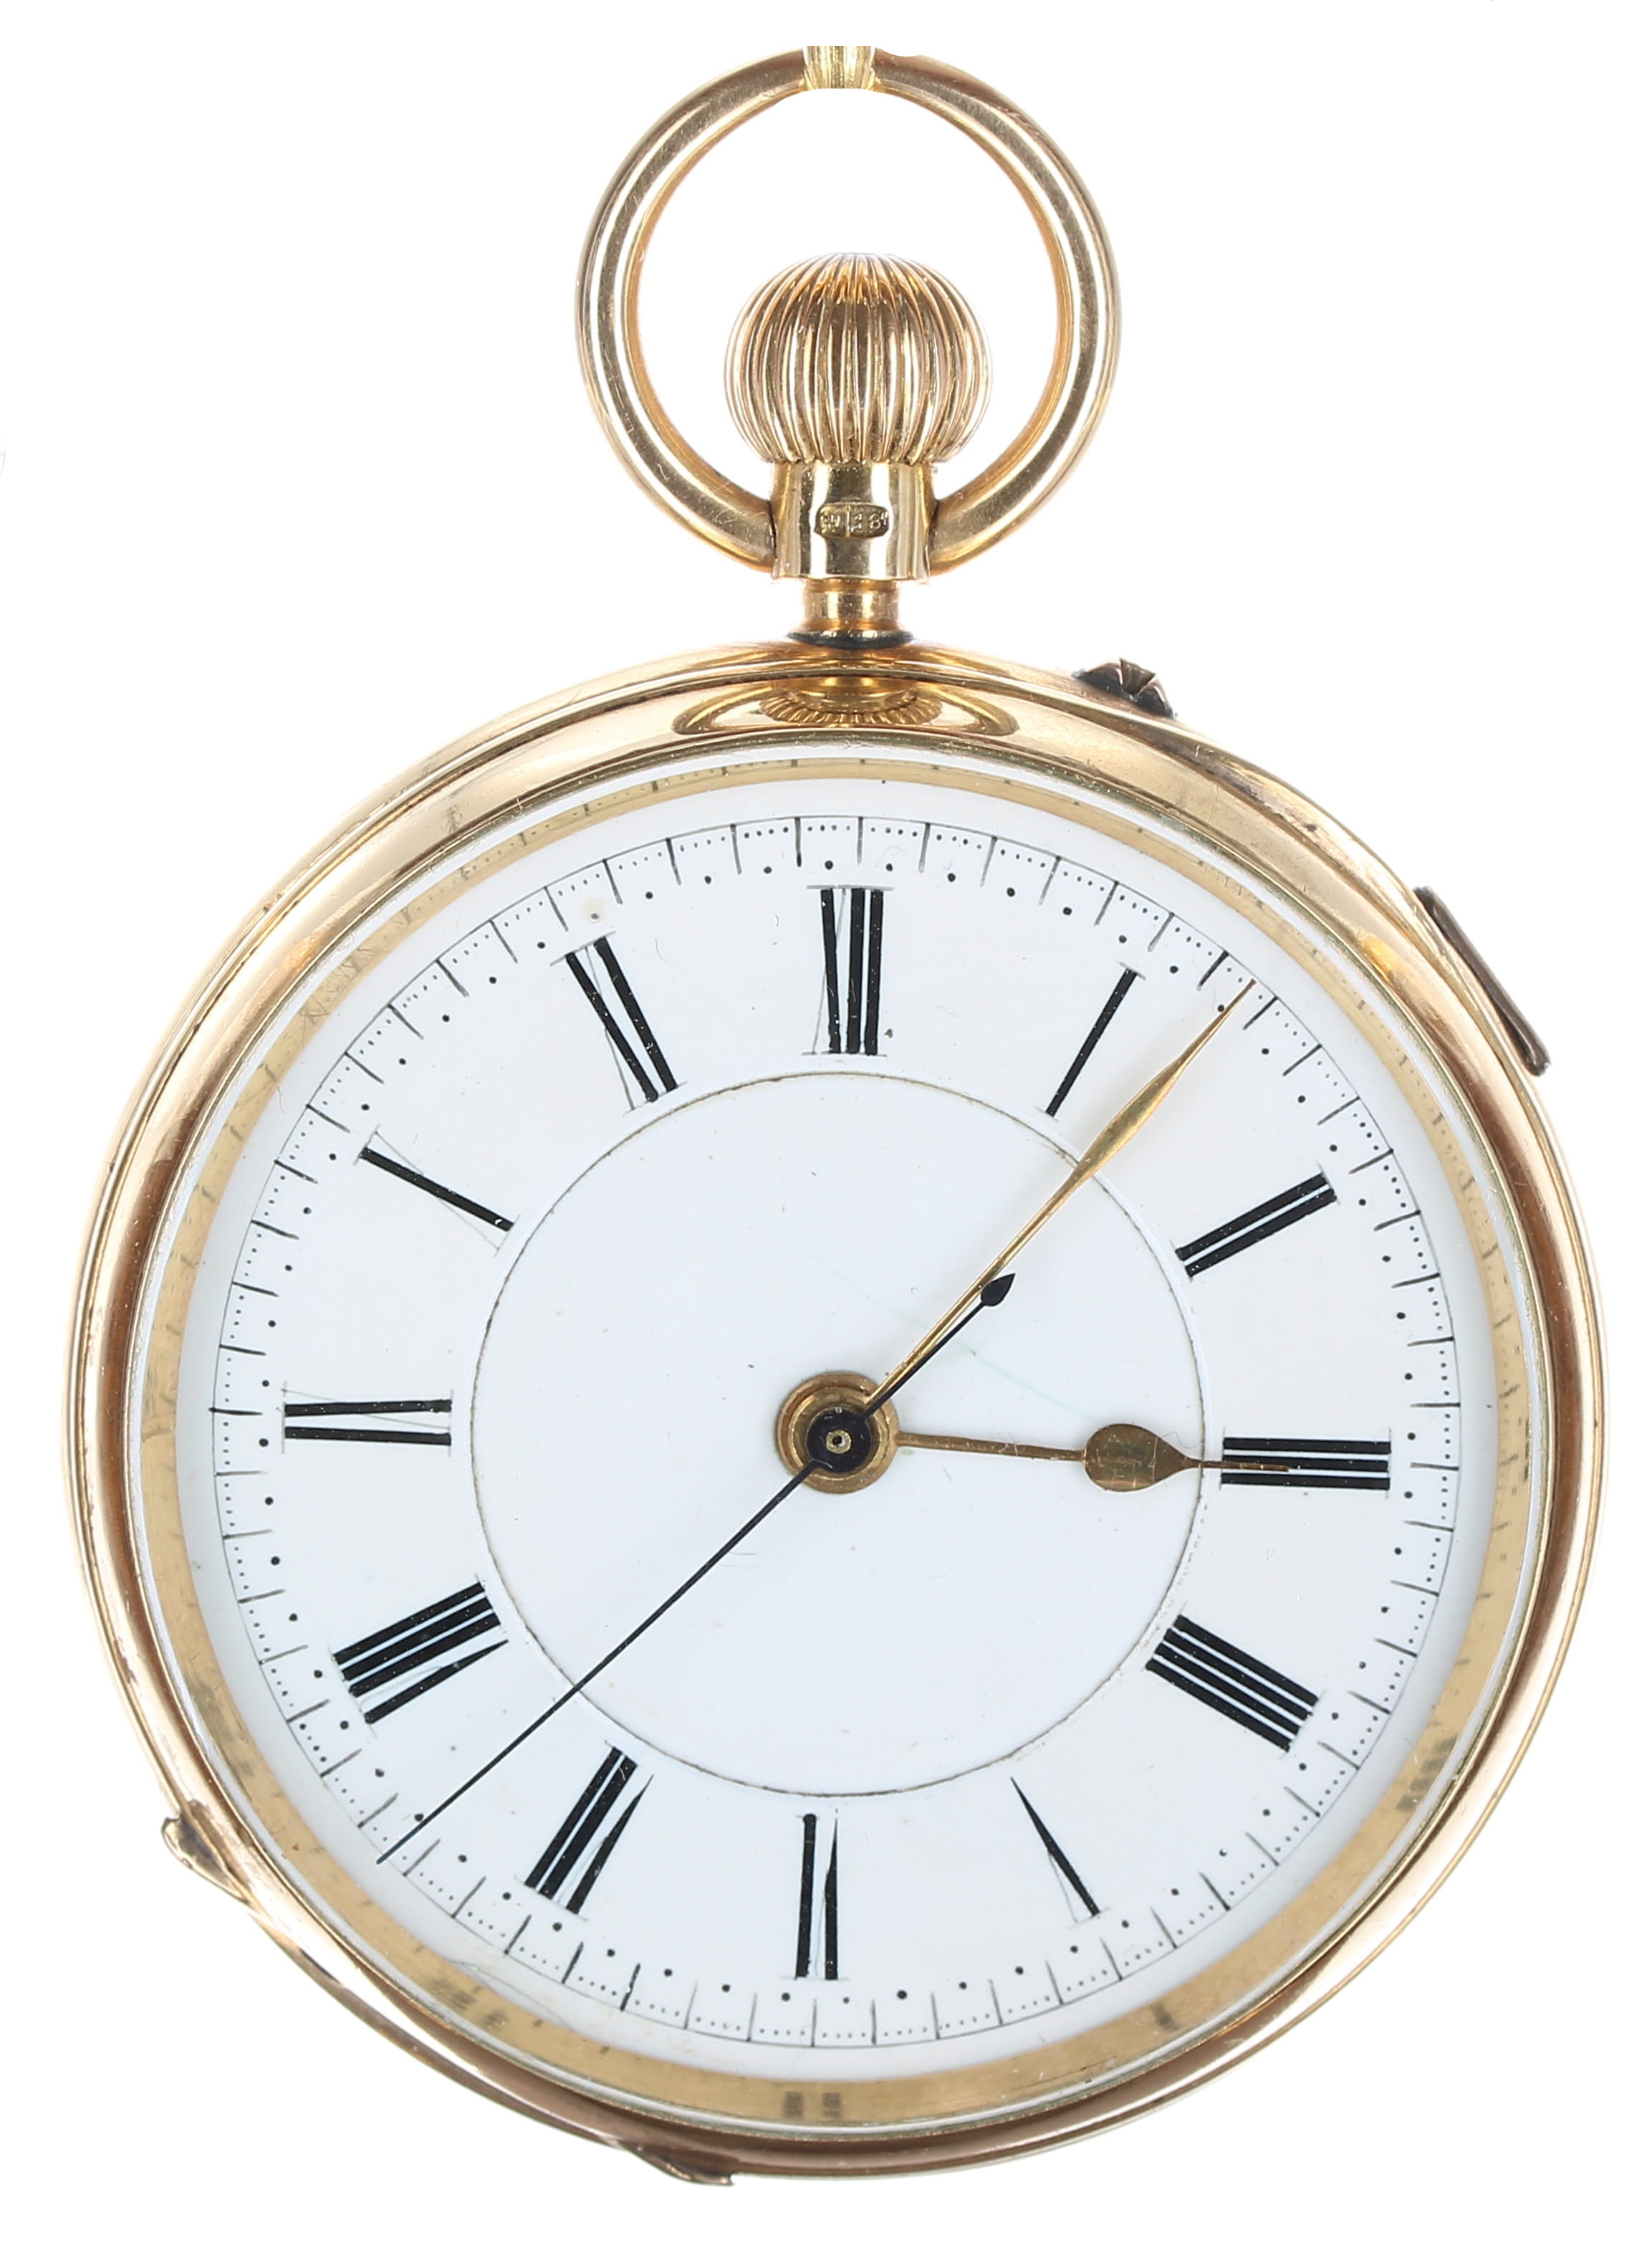 18ct centre seconds chronograph lever pocket watch, Chester 1901, the three-quarter plate movement - Image 2 of 4